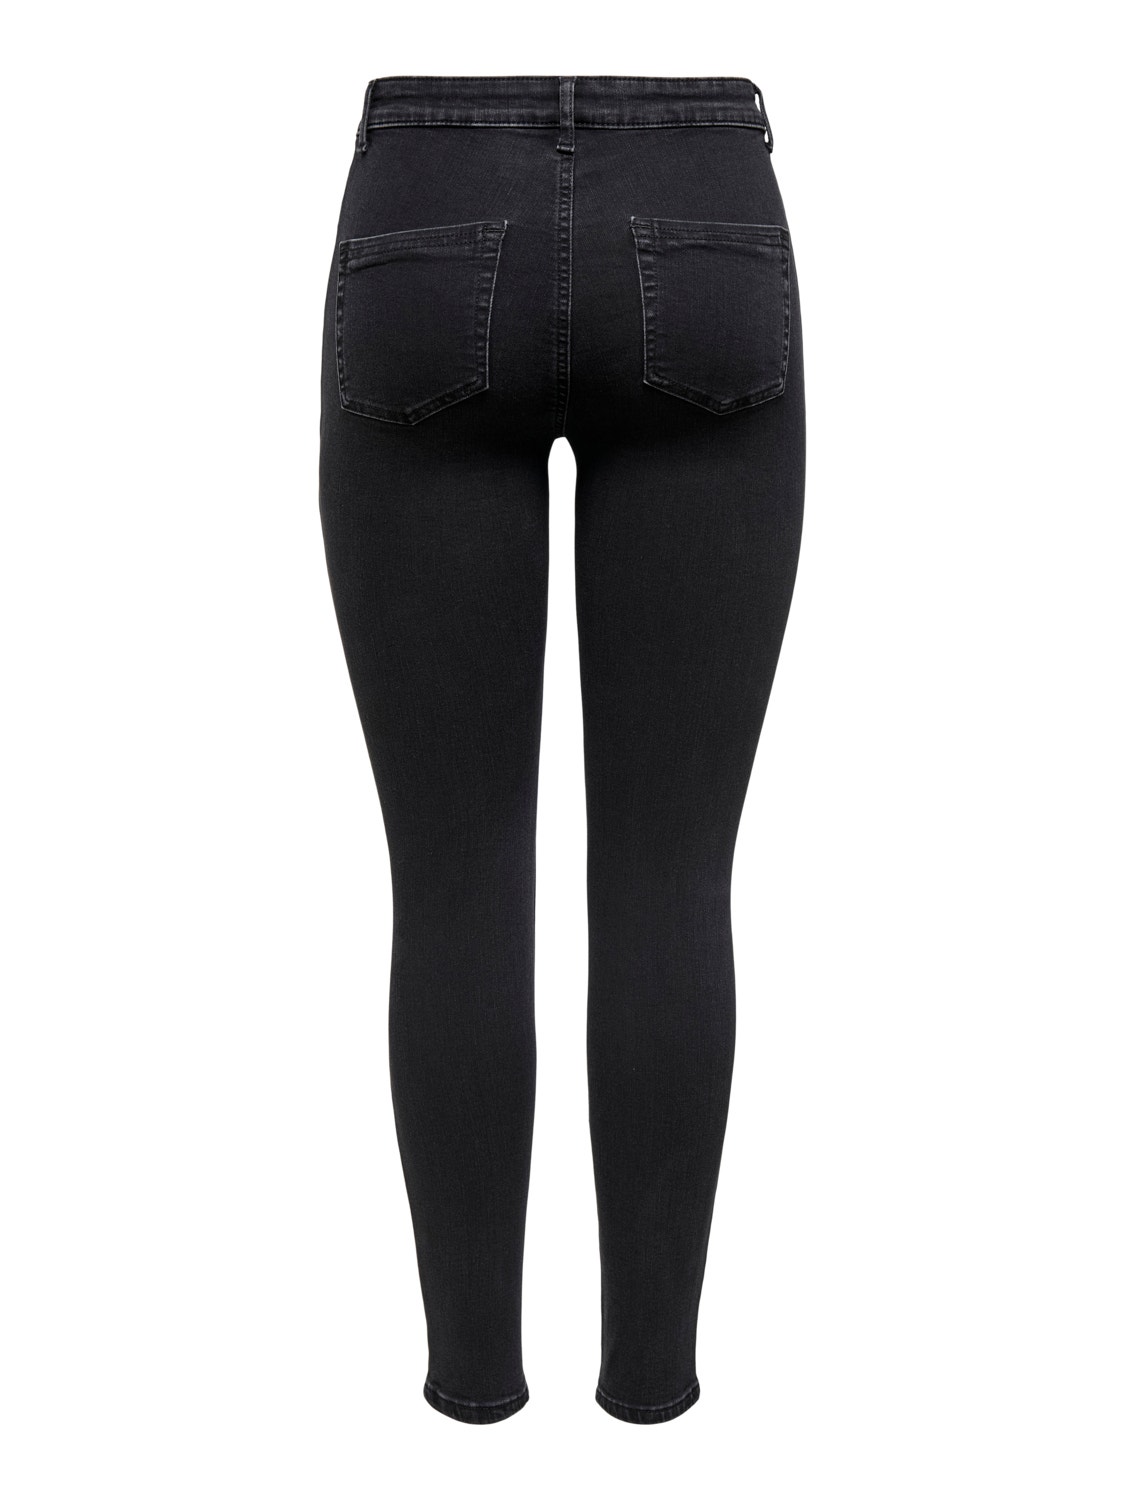 ONLY Skinny fit High waist Jeans -Black - 15242940